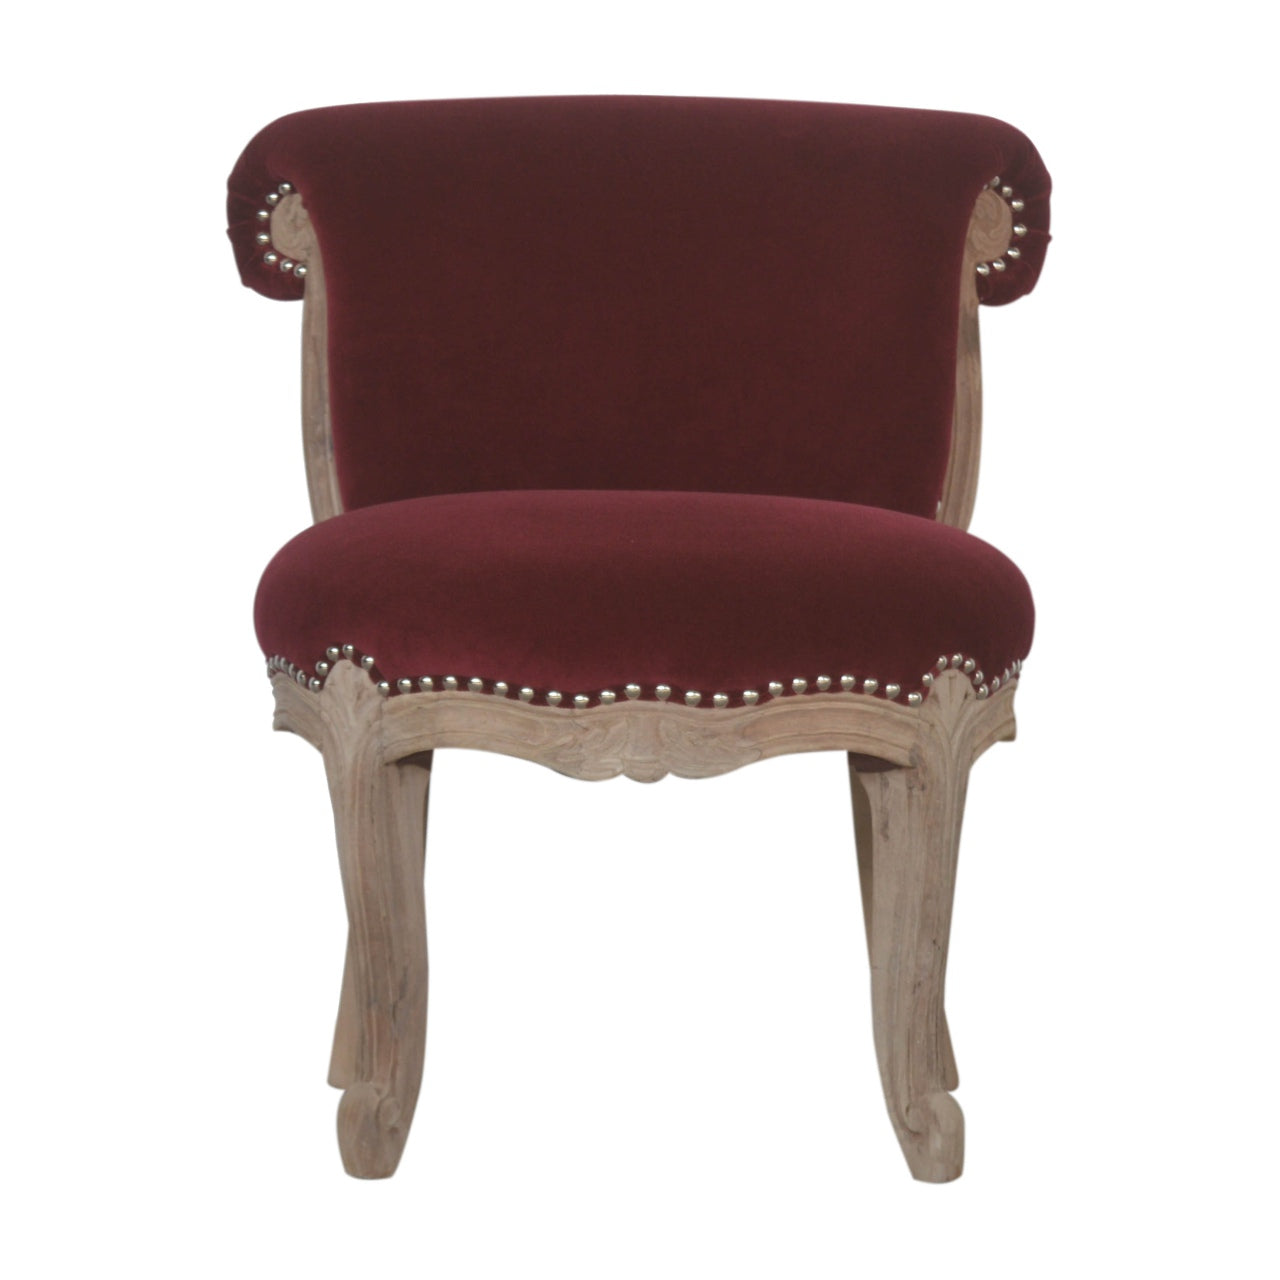 View Wine Red Velvet Studded Chair information